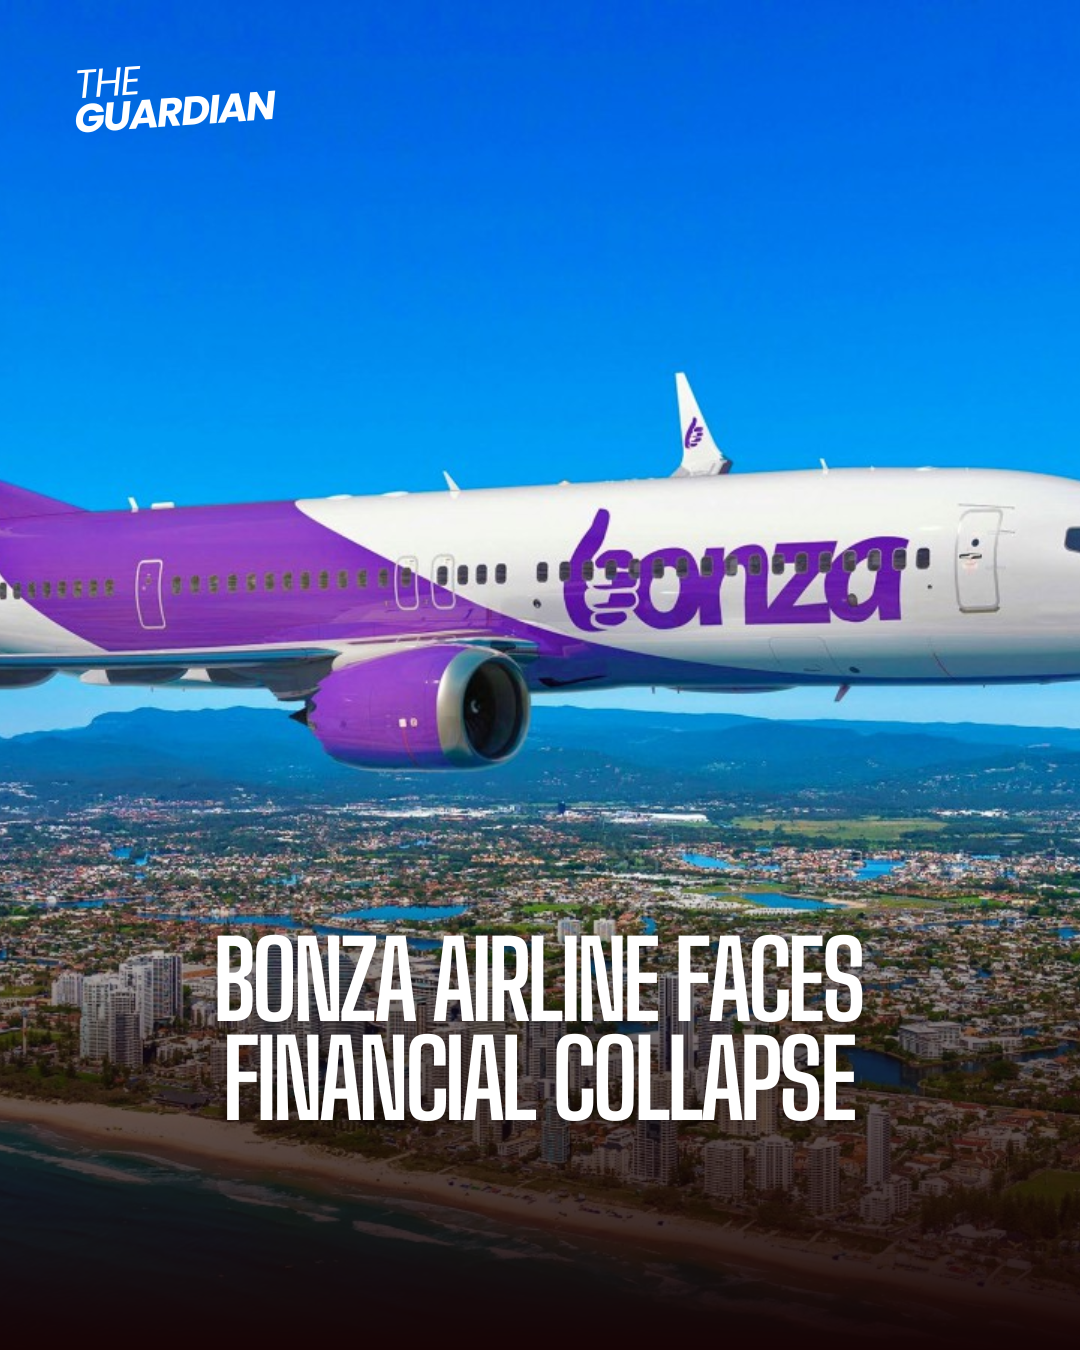 Australia's most recent budget airline has gone into voluntary administration after suddenly revoking all its flights on Tuesday.